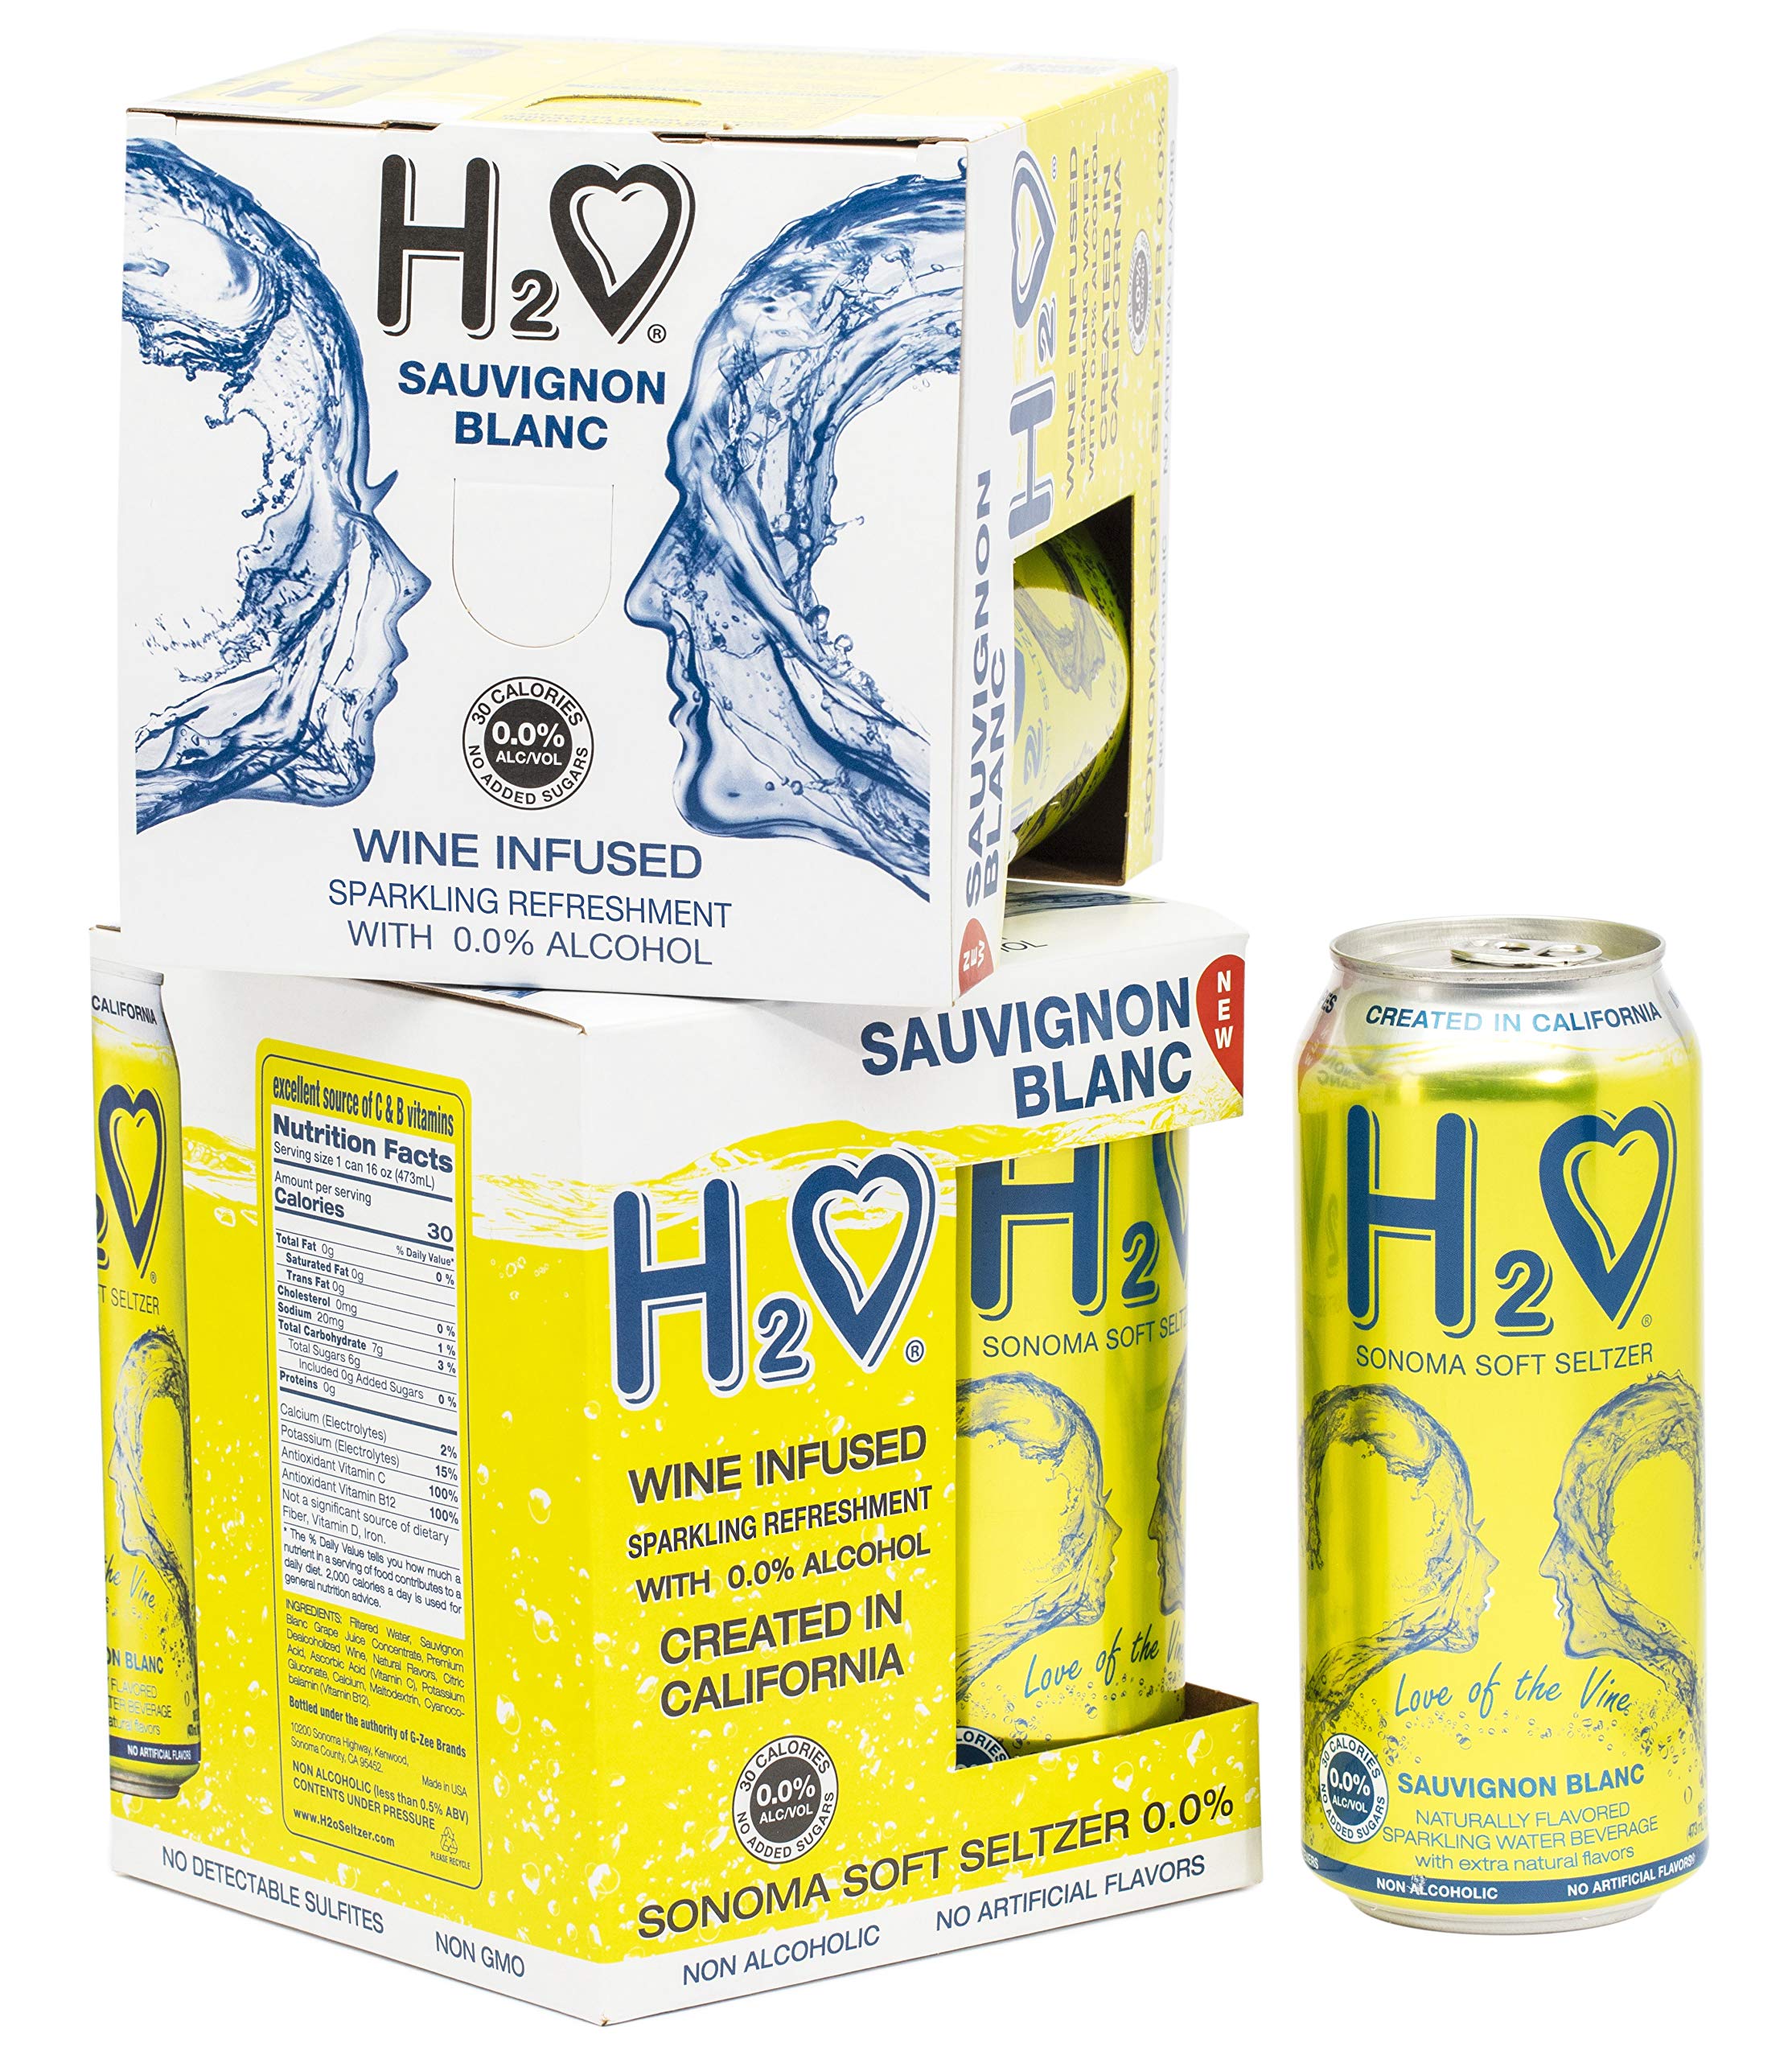 Sauvignon Blanc 0.0% ALC. in Seltzer | Science ❤ Wine-Infused – with Unlocked Beverages Pioneers Sonoma Sonoma Refreshment, Alcohol 0.0% Soft | H2o® by